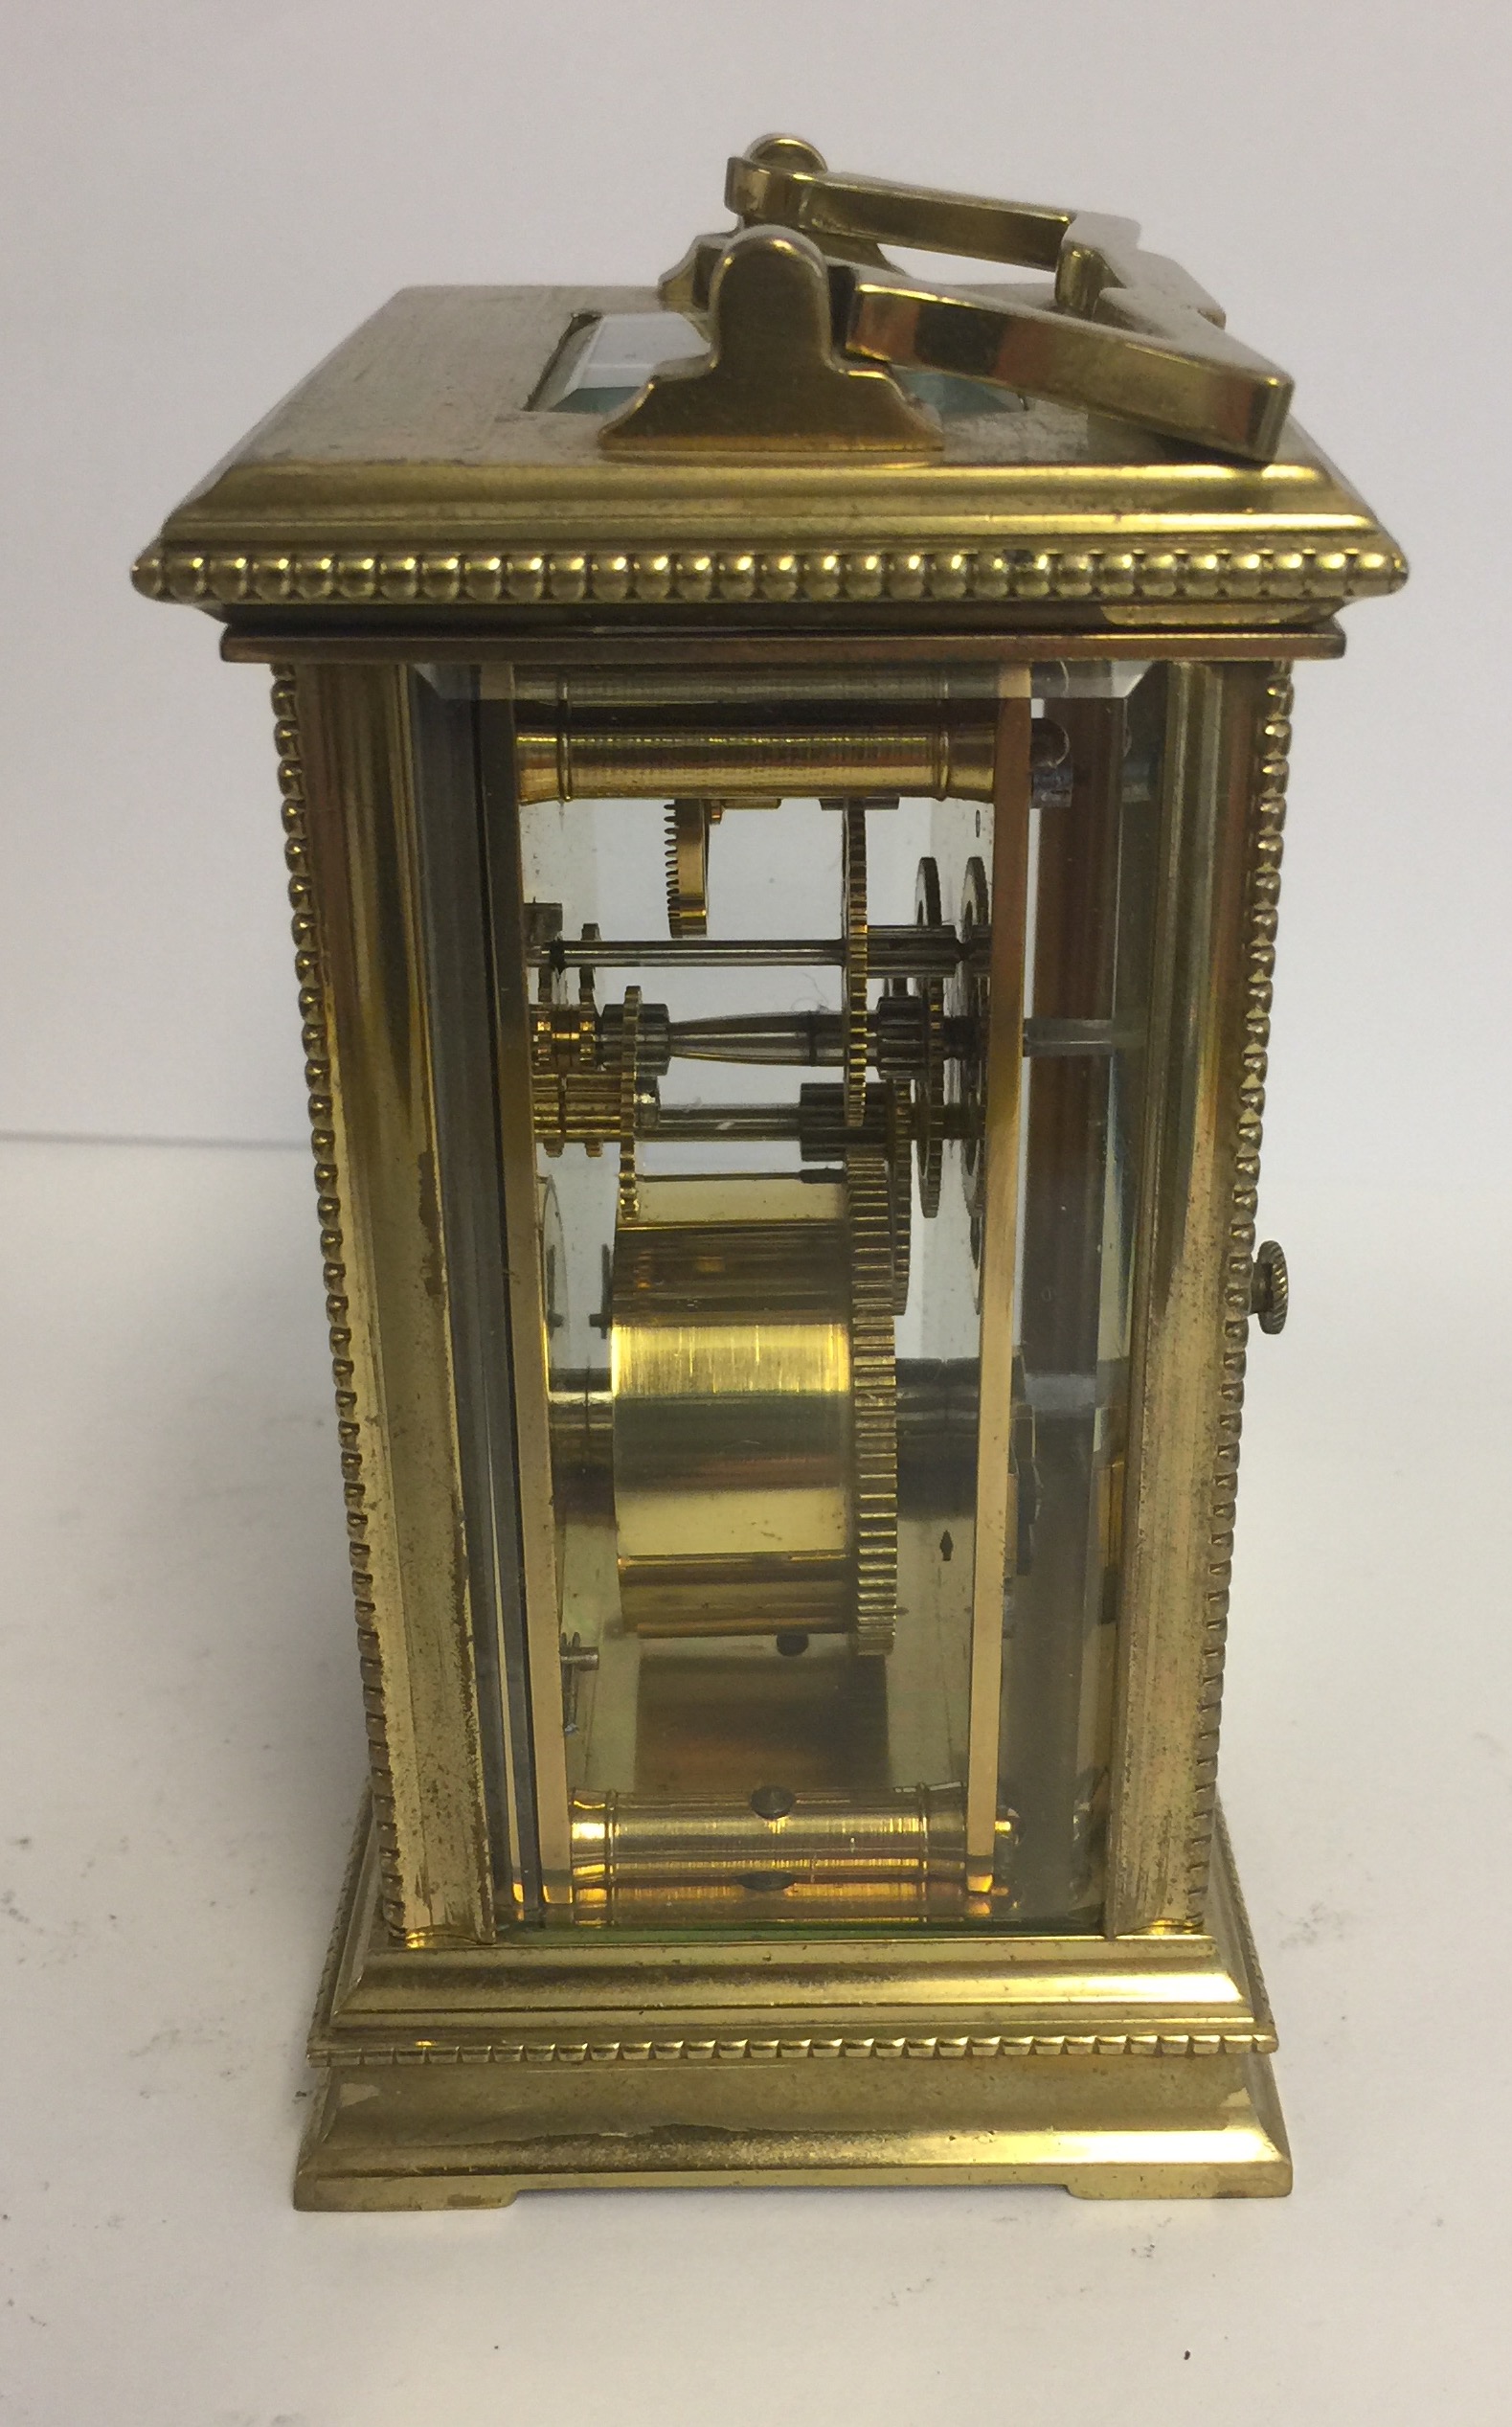 A 19TH CENTURY BRASS & SILVERED CASED CARRIAGE CLOCK. (12cm x 8cm x 7cm) - Image 3 of 3